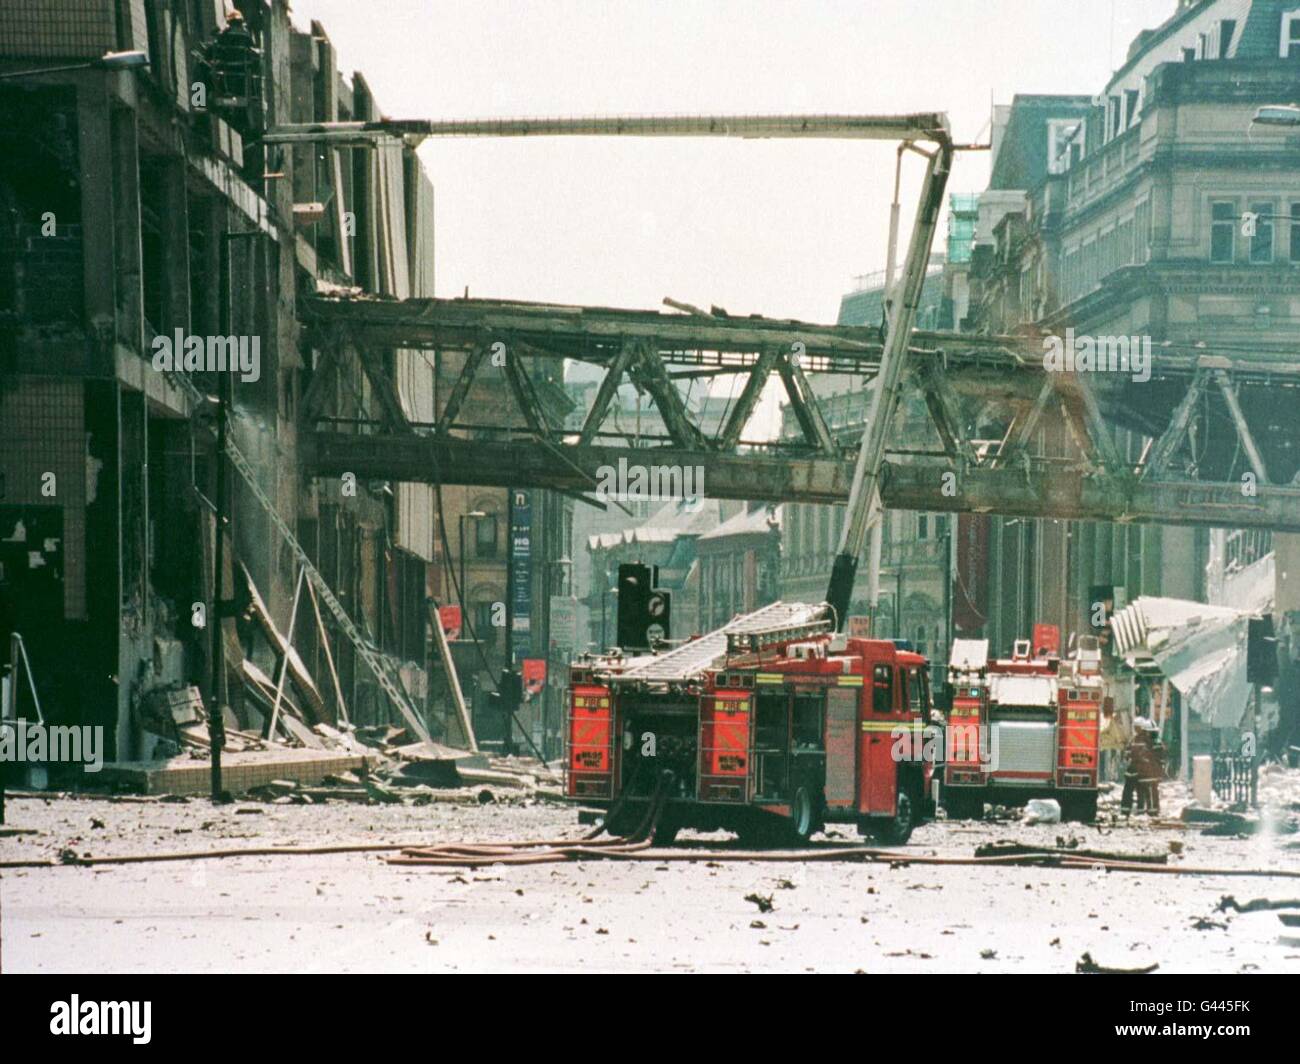 Police issue photo of bomb damage in Manchester City center. Photo PA Stock Photo